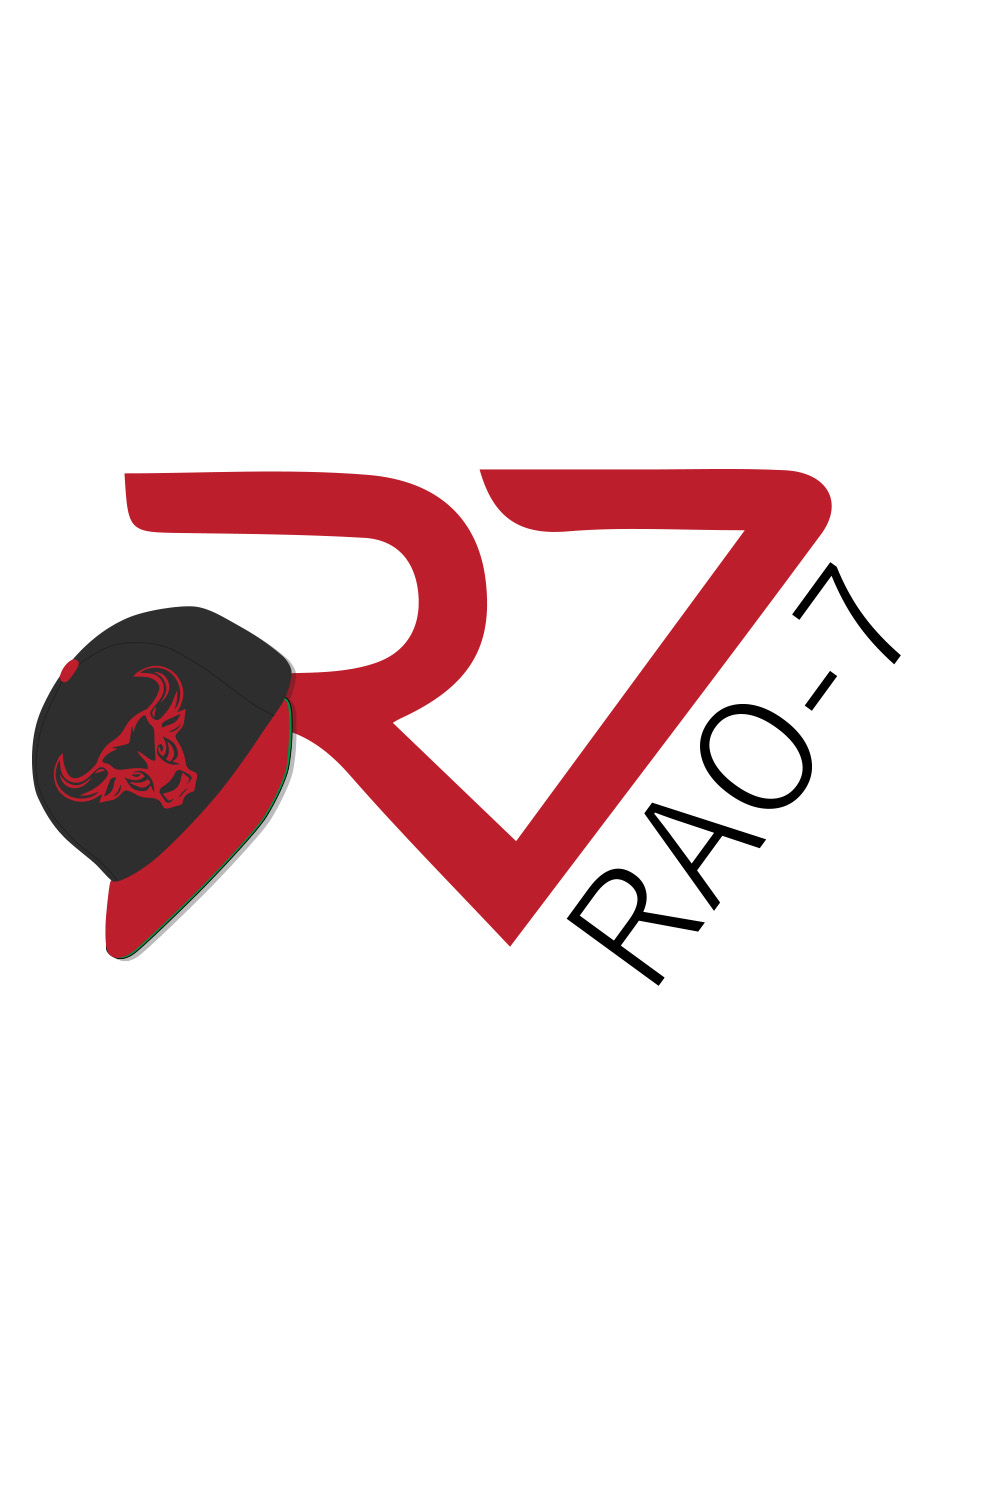 Rao-7 Cap & Hat Logo, Wearables, Clothing, Fashion, Style, Swag pinterest preview image.